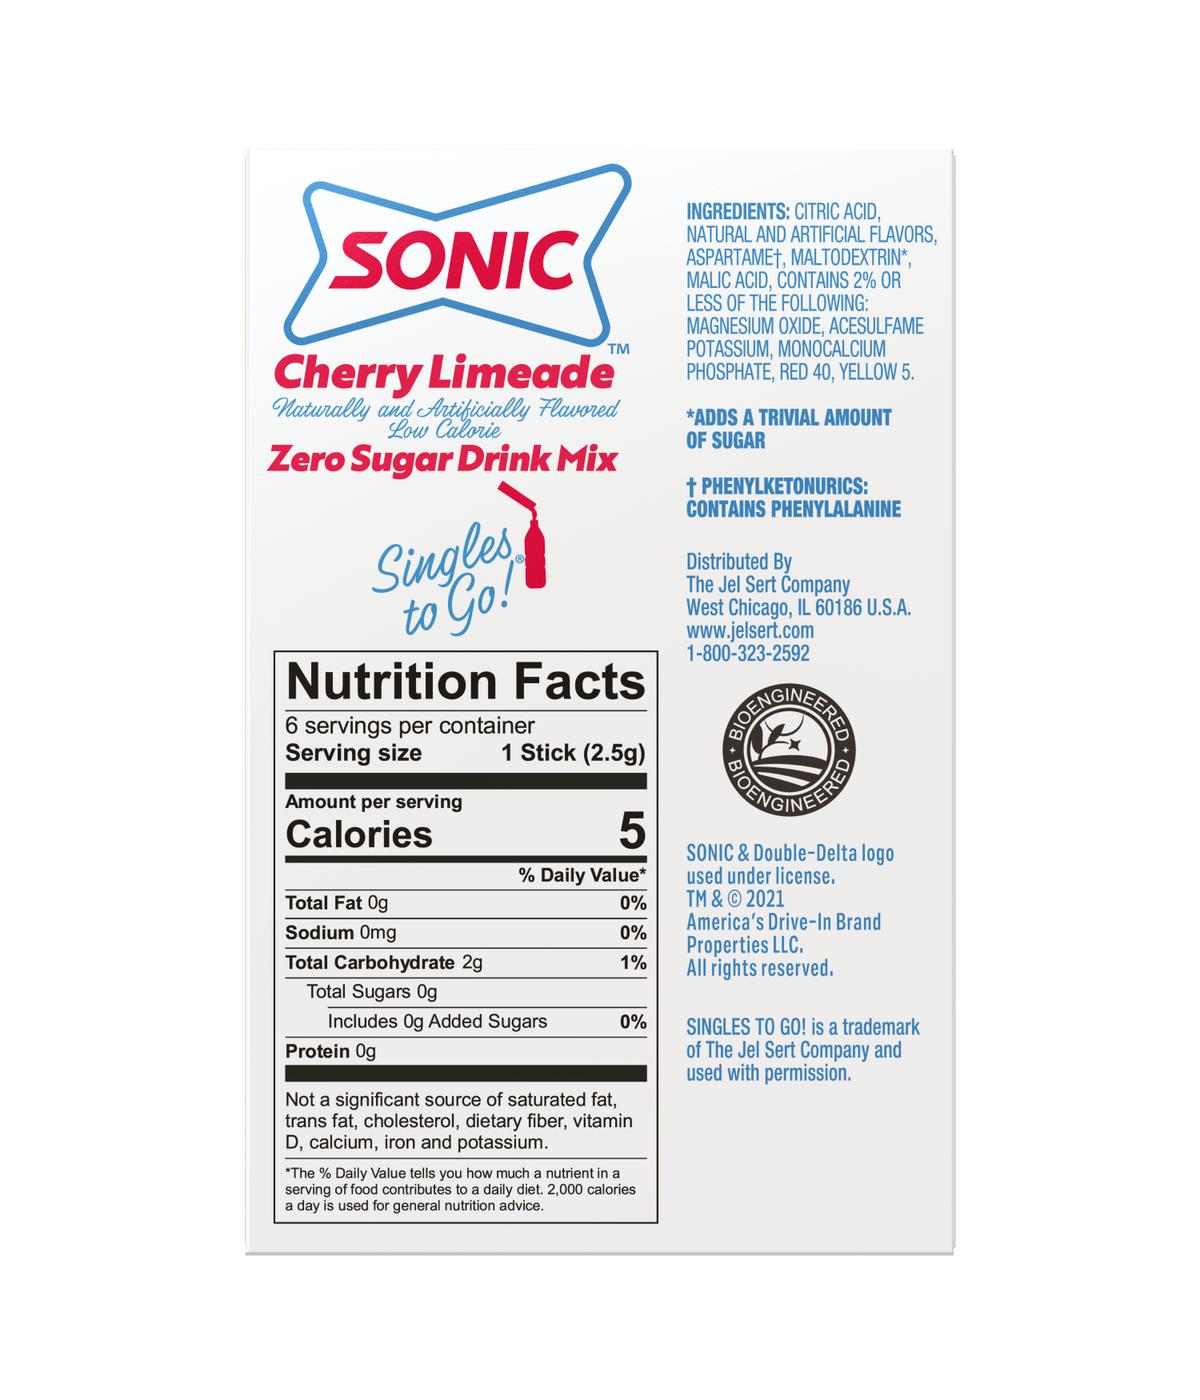 Sonic Singles-To-Go Sugar Free Drink Mix – Cherry Limeade; image 3 of 4